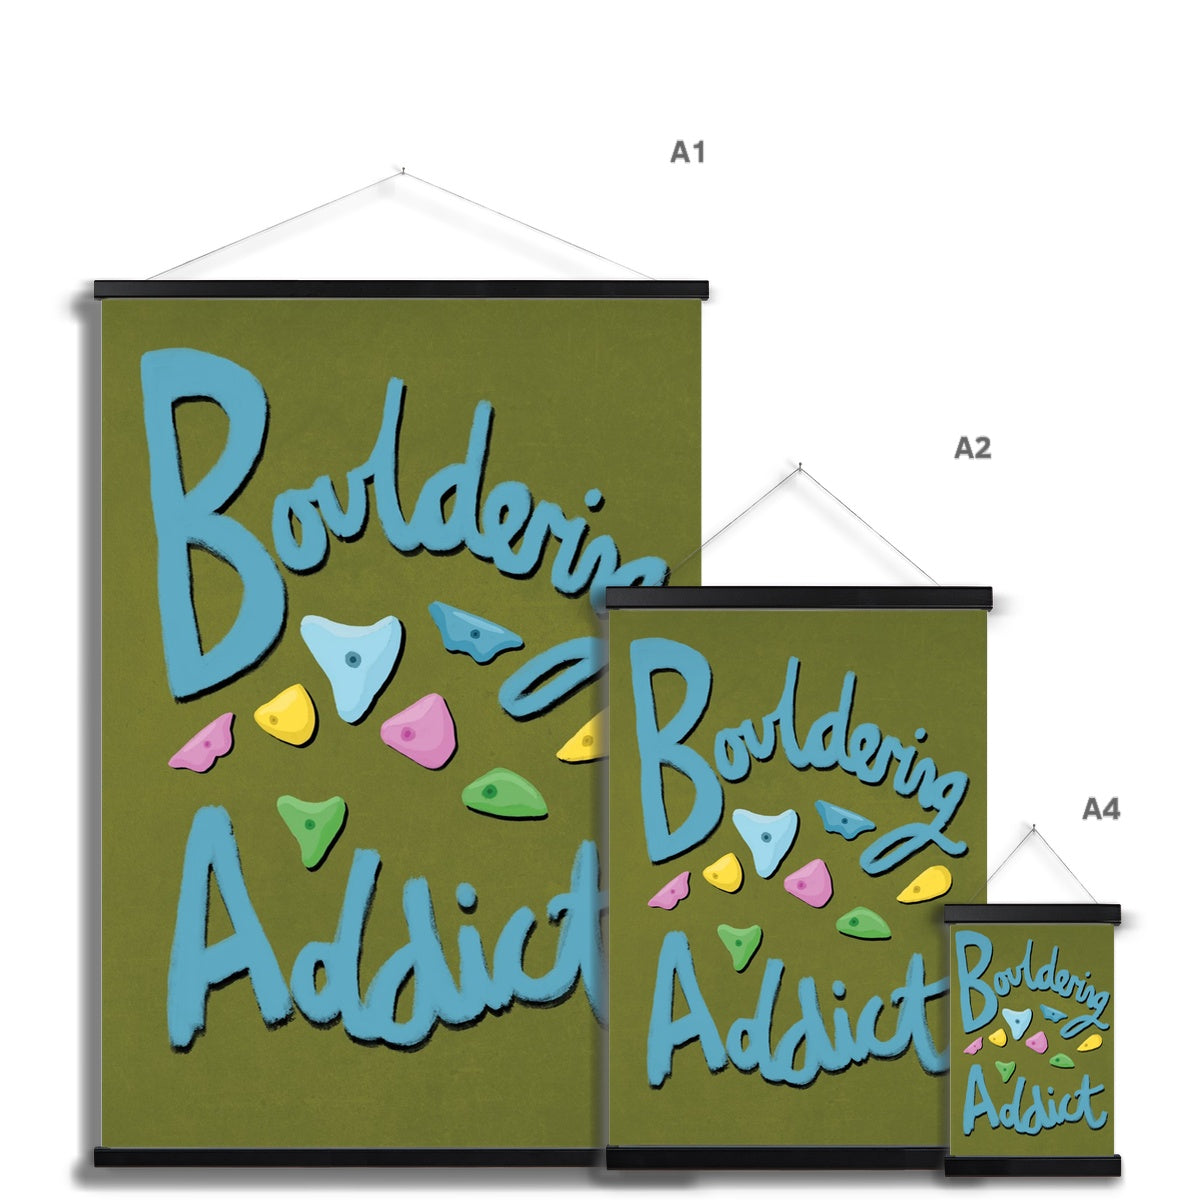 Bouldering Addict - Olive Green and Blue Fine Art Print with Hanger